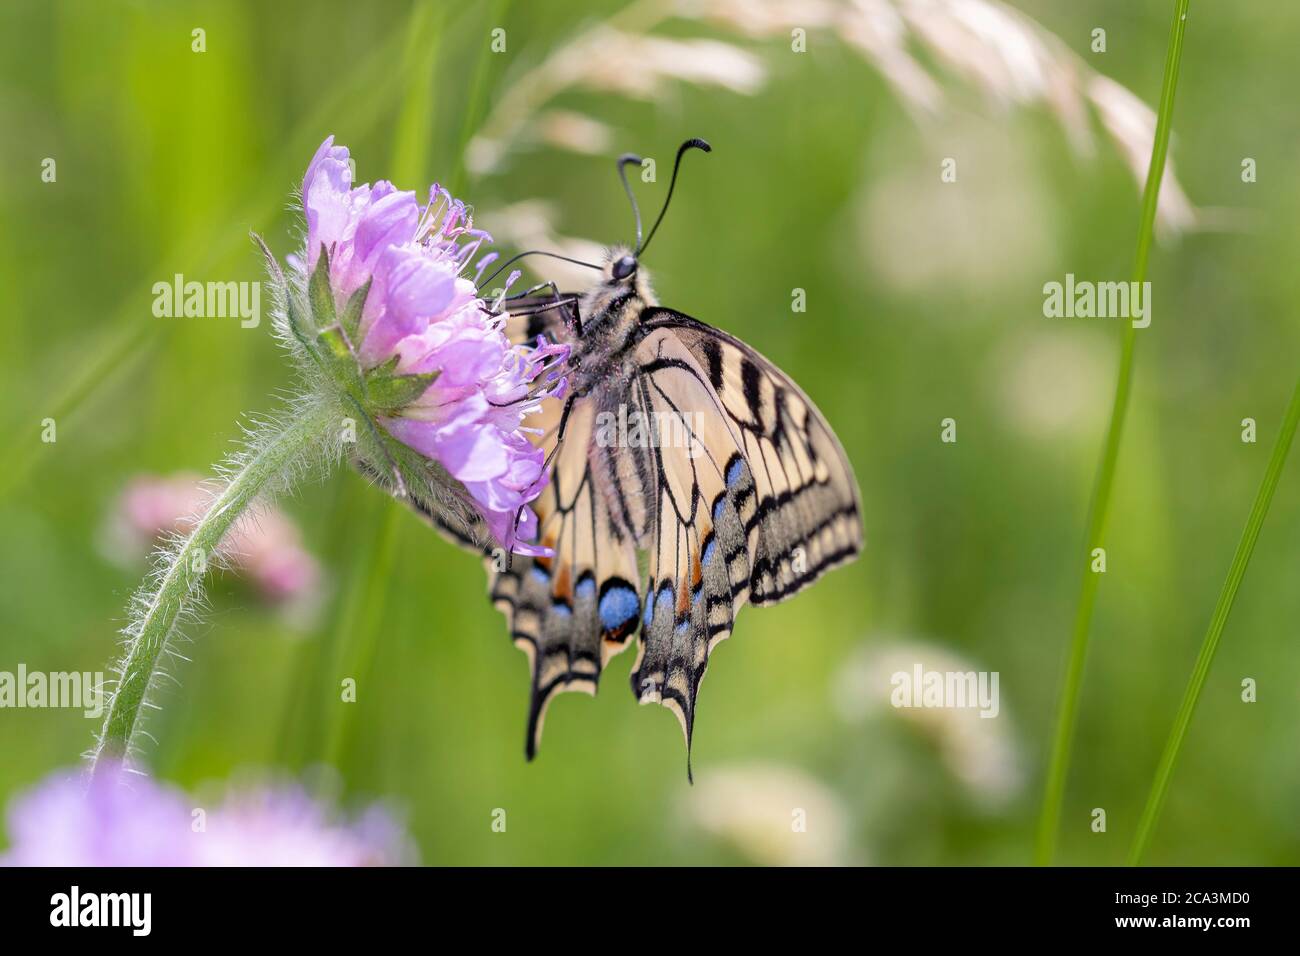 Common yellow swallowtail or old world swallowtail - Papilio machaon - on a flower Stock Photo